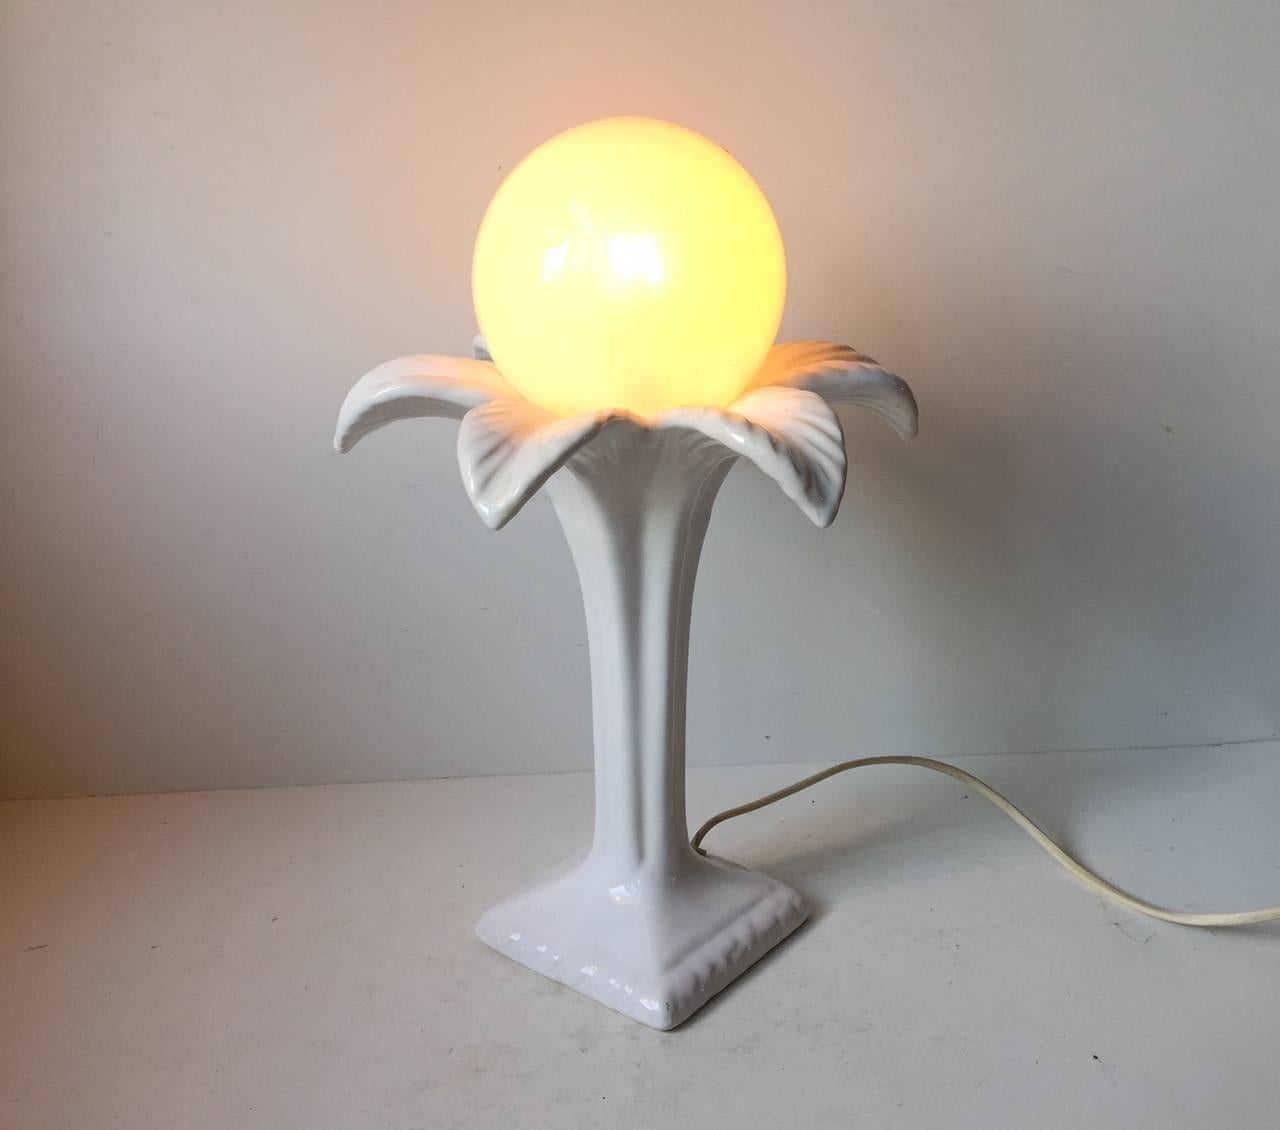 Danish palm three shaped pottery table light. This light with is distinct art deco styling was designed by Michael Andersen & Son during the 1970s. It features a spherical opaline glass shade.